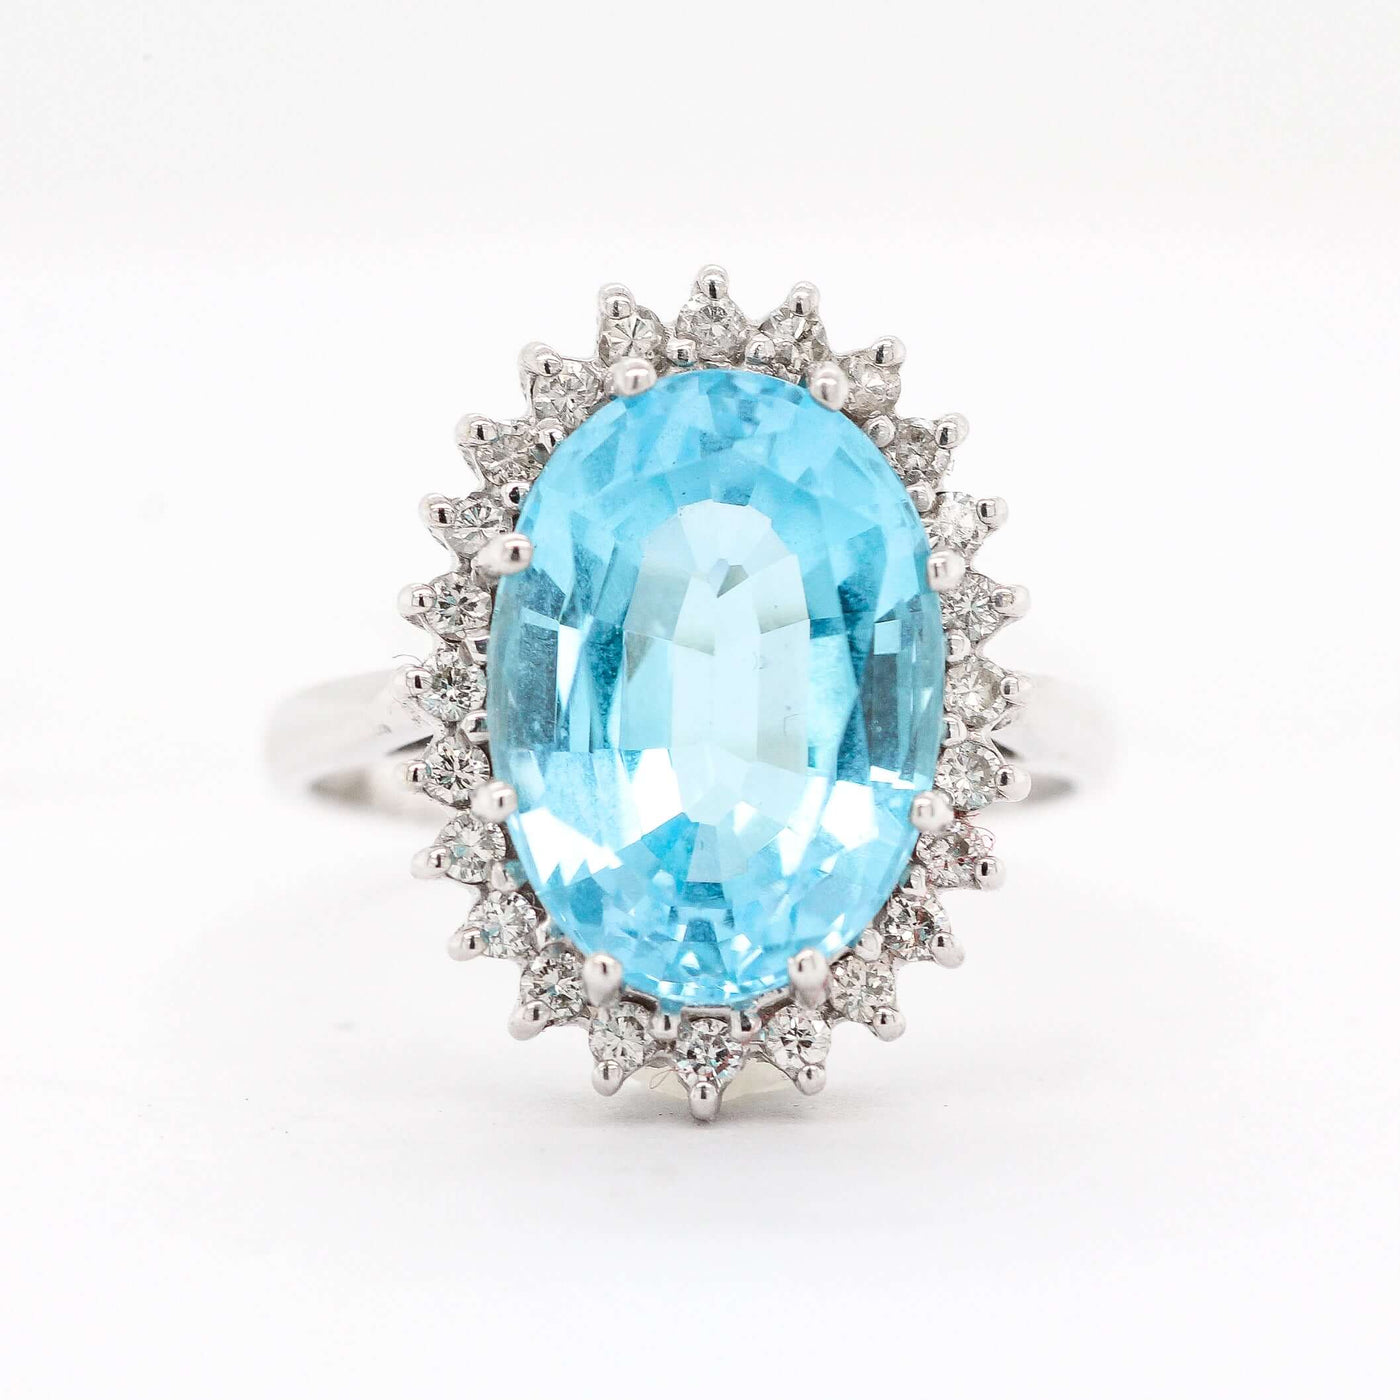 14KW 8.50 CT BLUE TOPAZ AND DIAMOND RING .50 CTTW